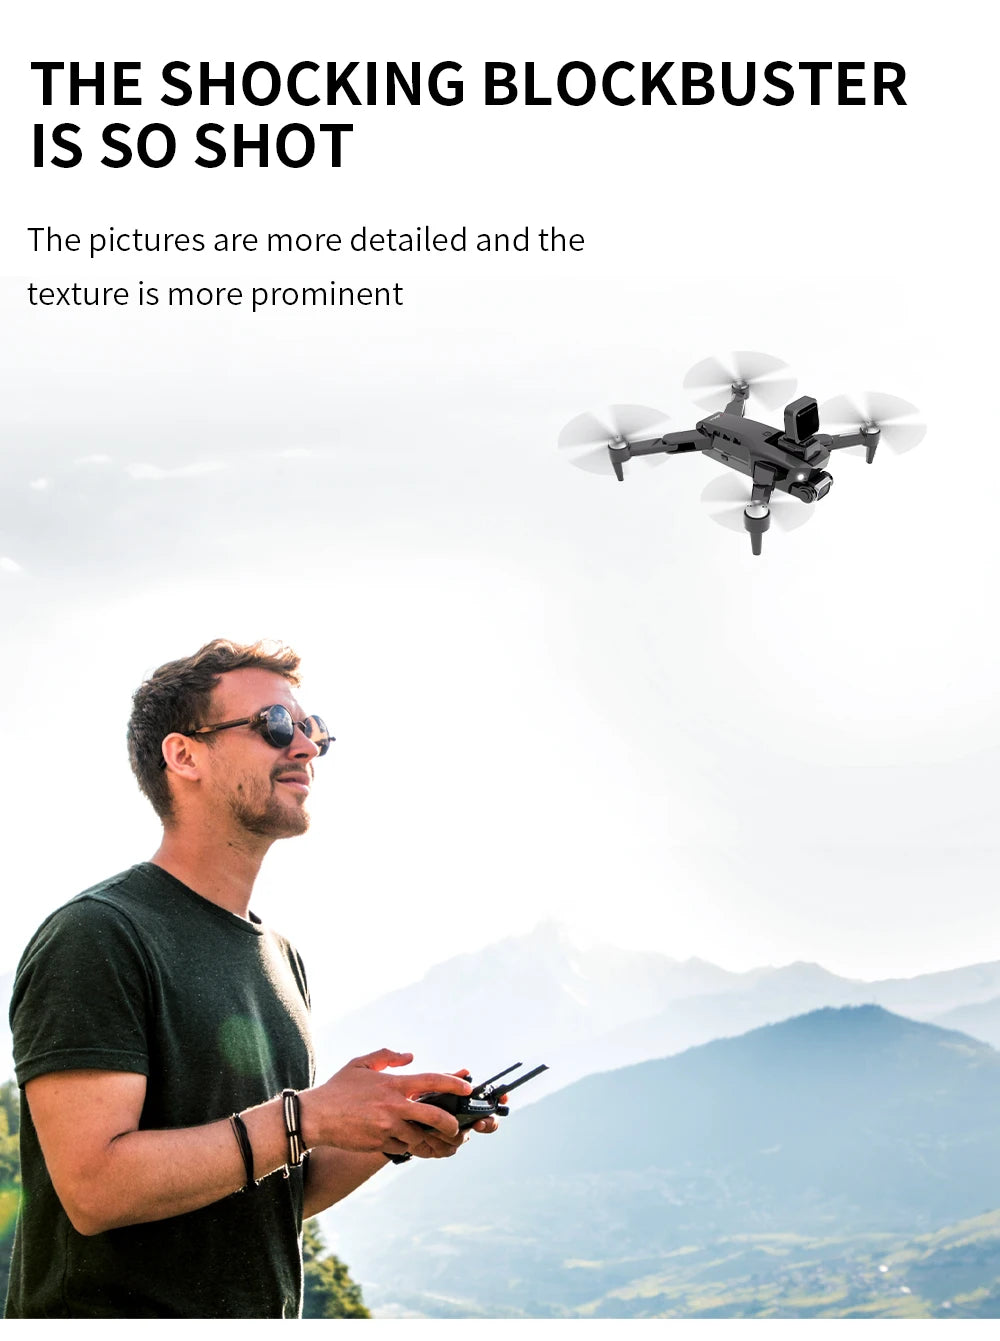 HJ40 Drone, SHOCKING BLOCKBUSTER IS SO SHOT The pictures are more detailed and the